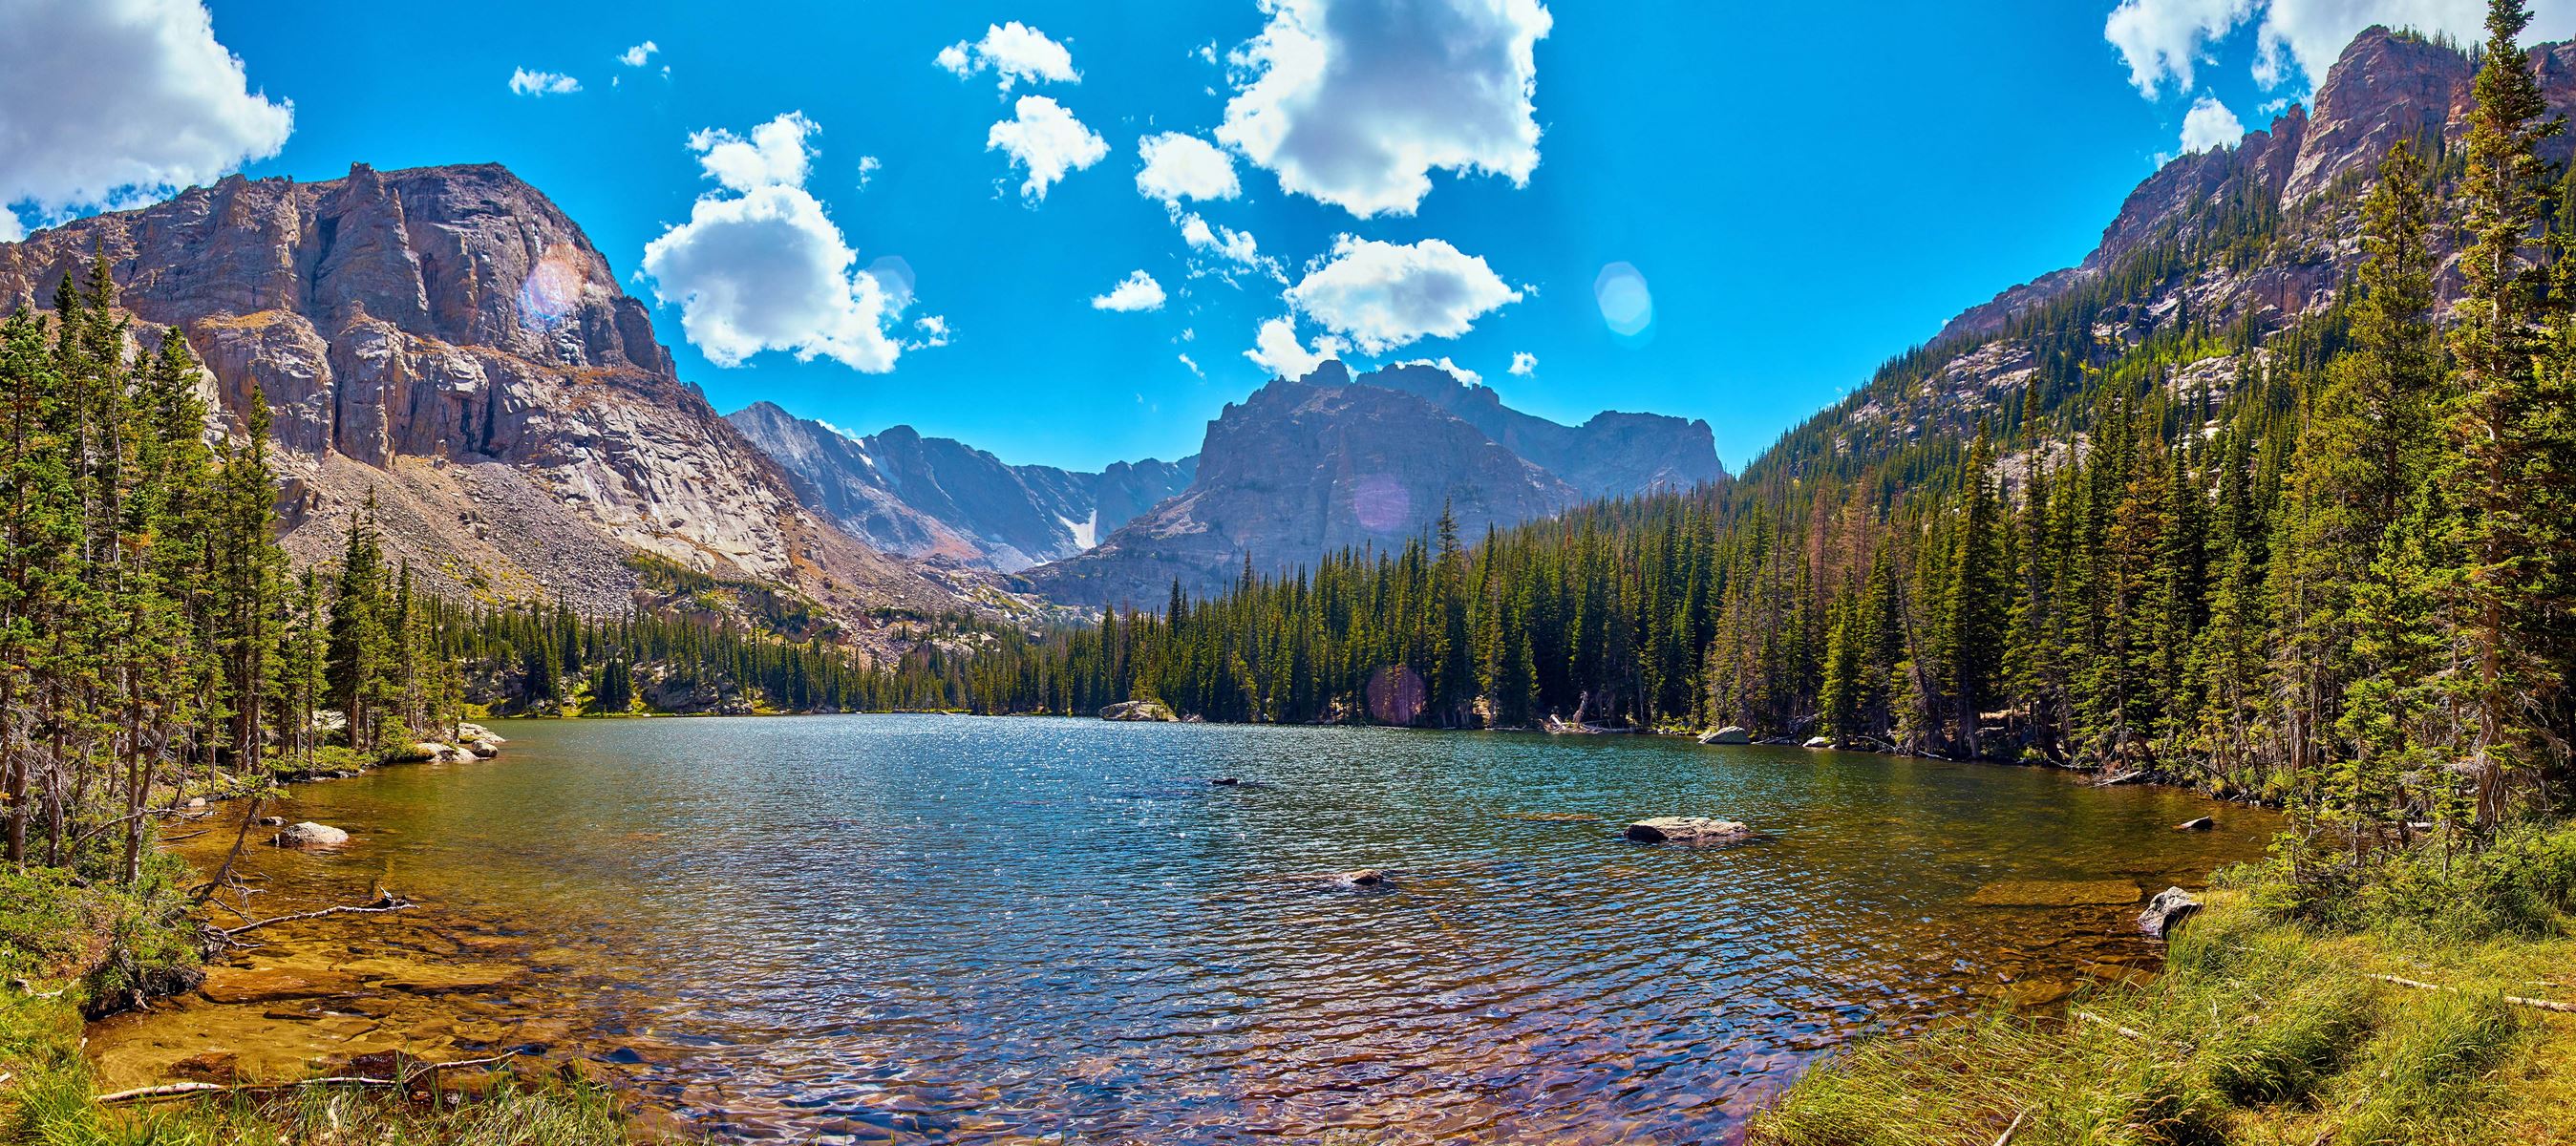 Mountains and lake in Colorado